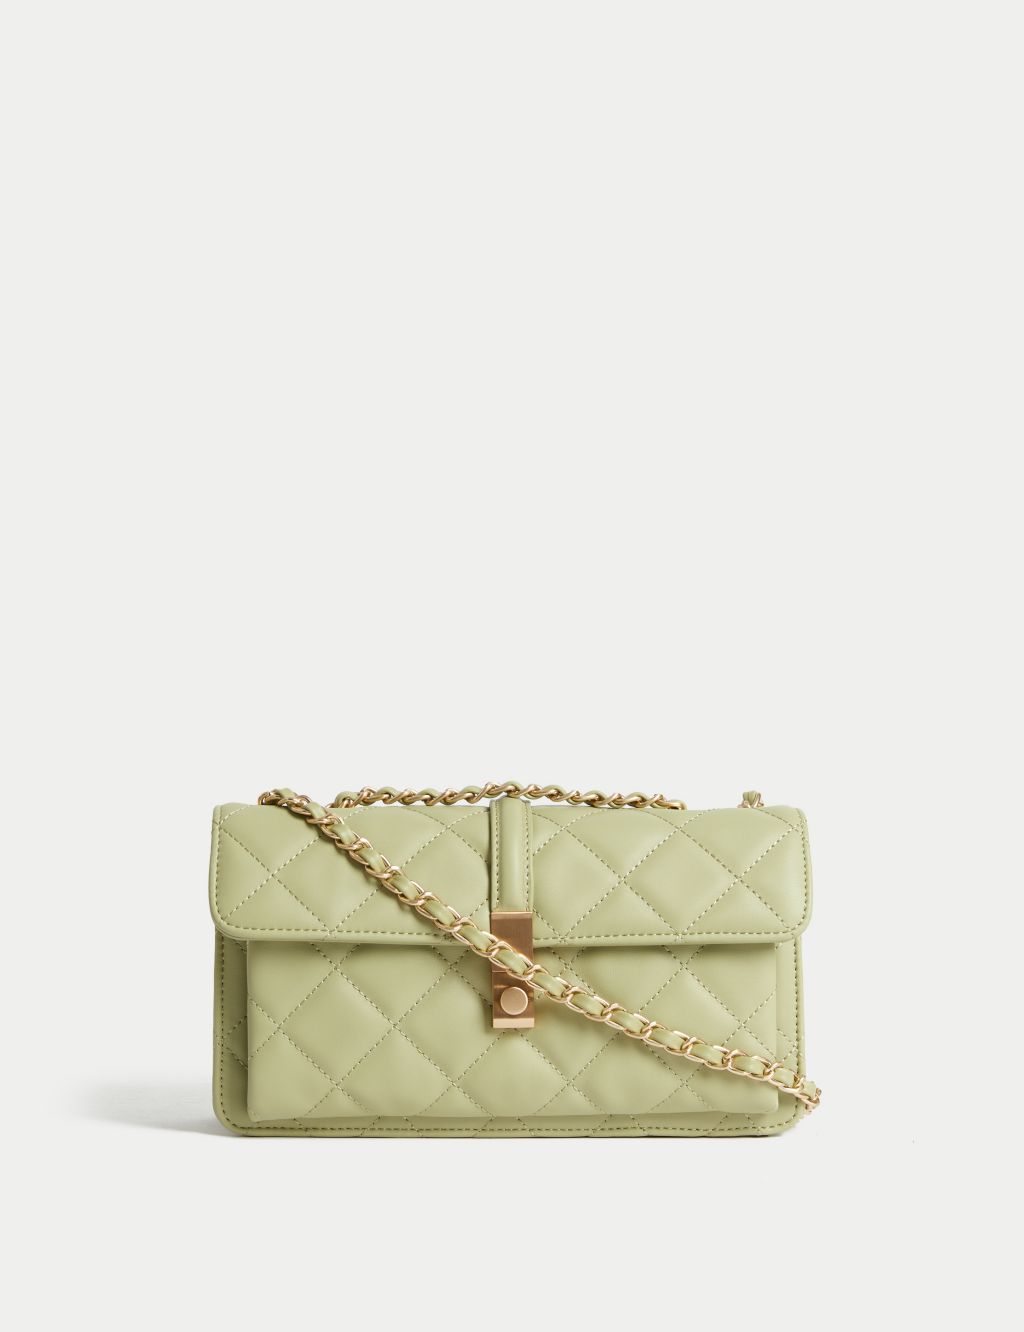 Quilted Chain Strap Cross Body Shoulder Bag